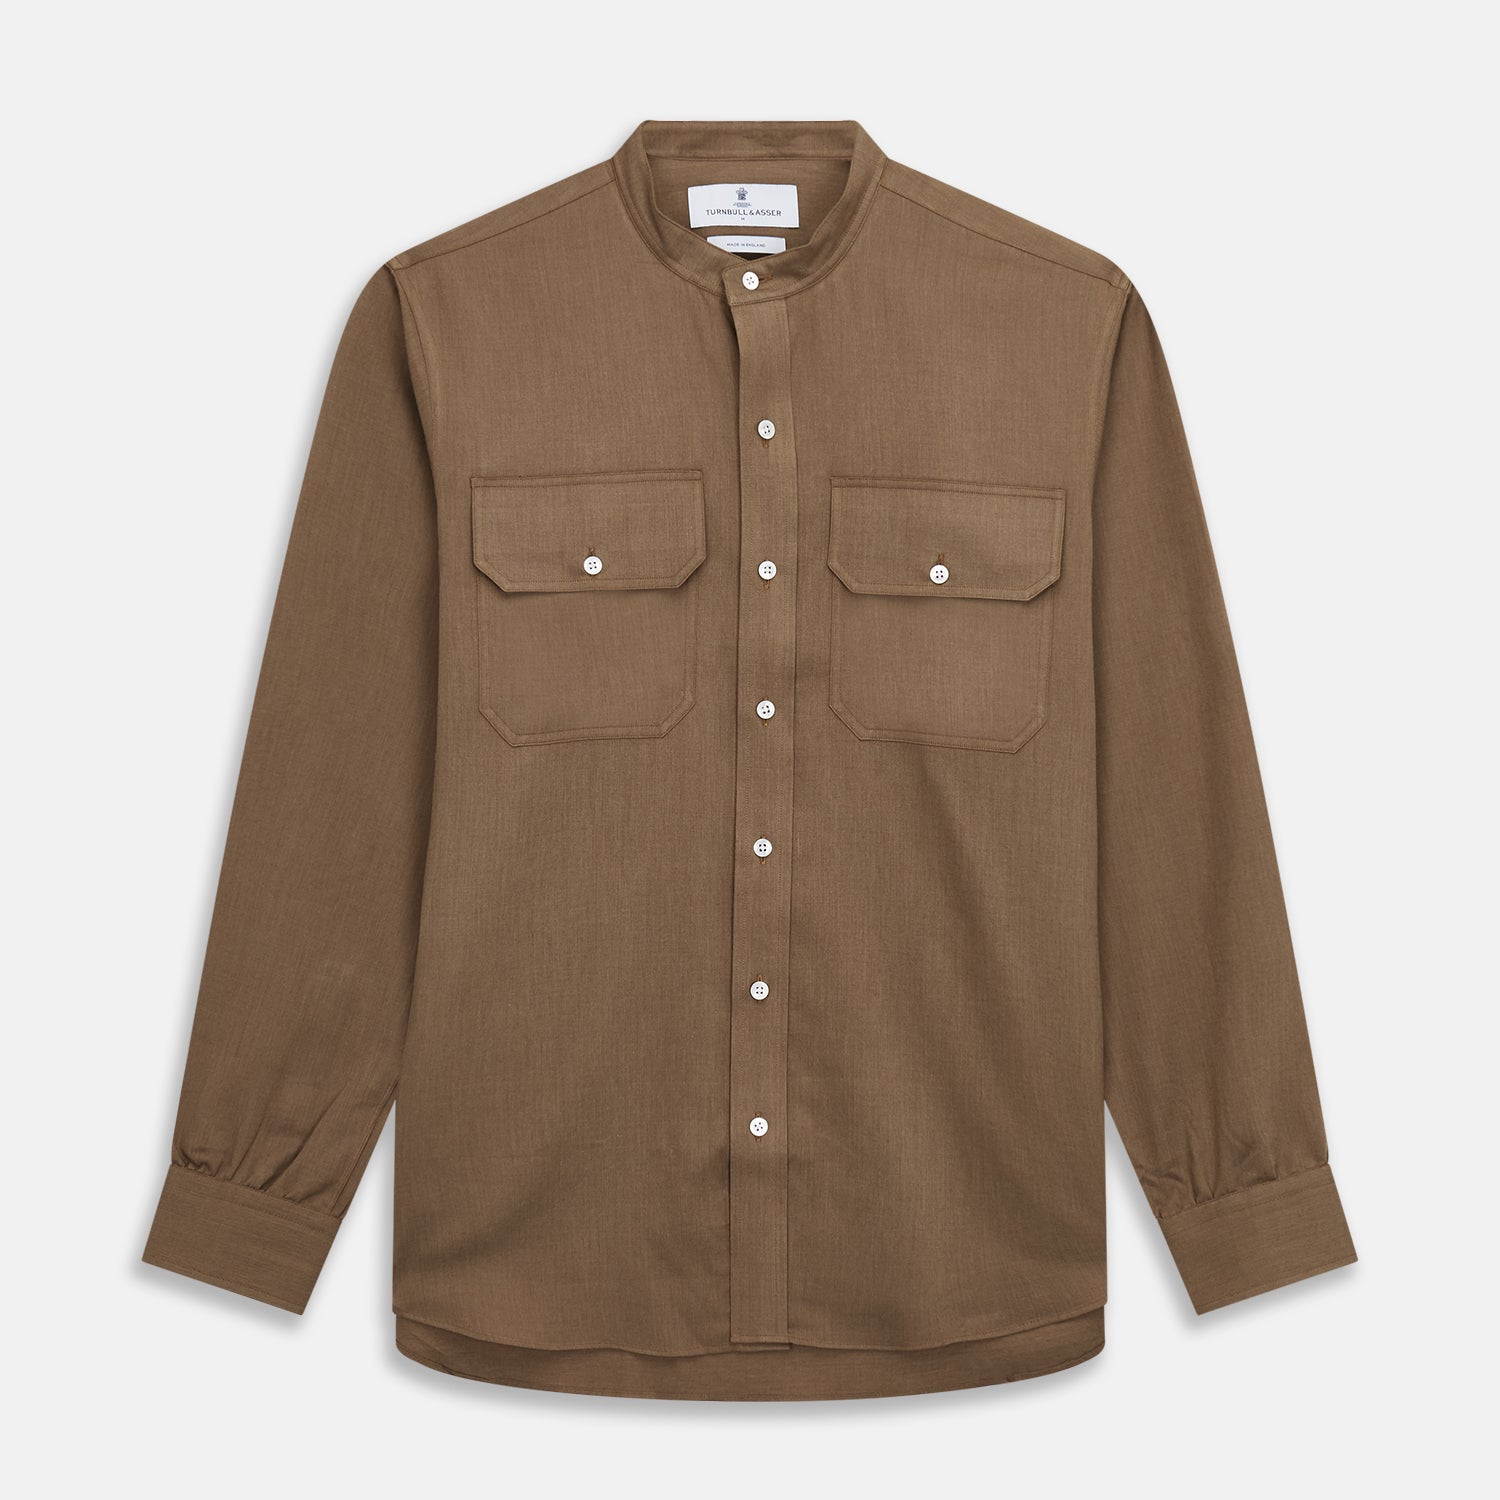 Brown Military Weekend Fit Cotton & Wool Shirt with Stand Collar and 1 Button Cuffs